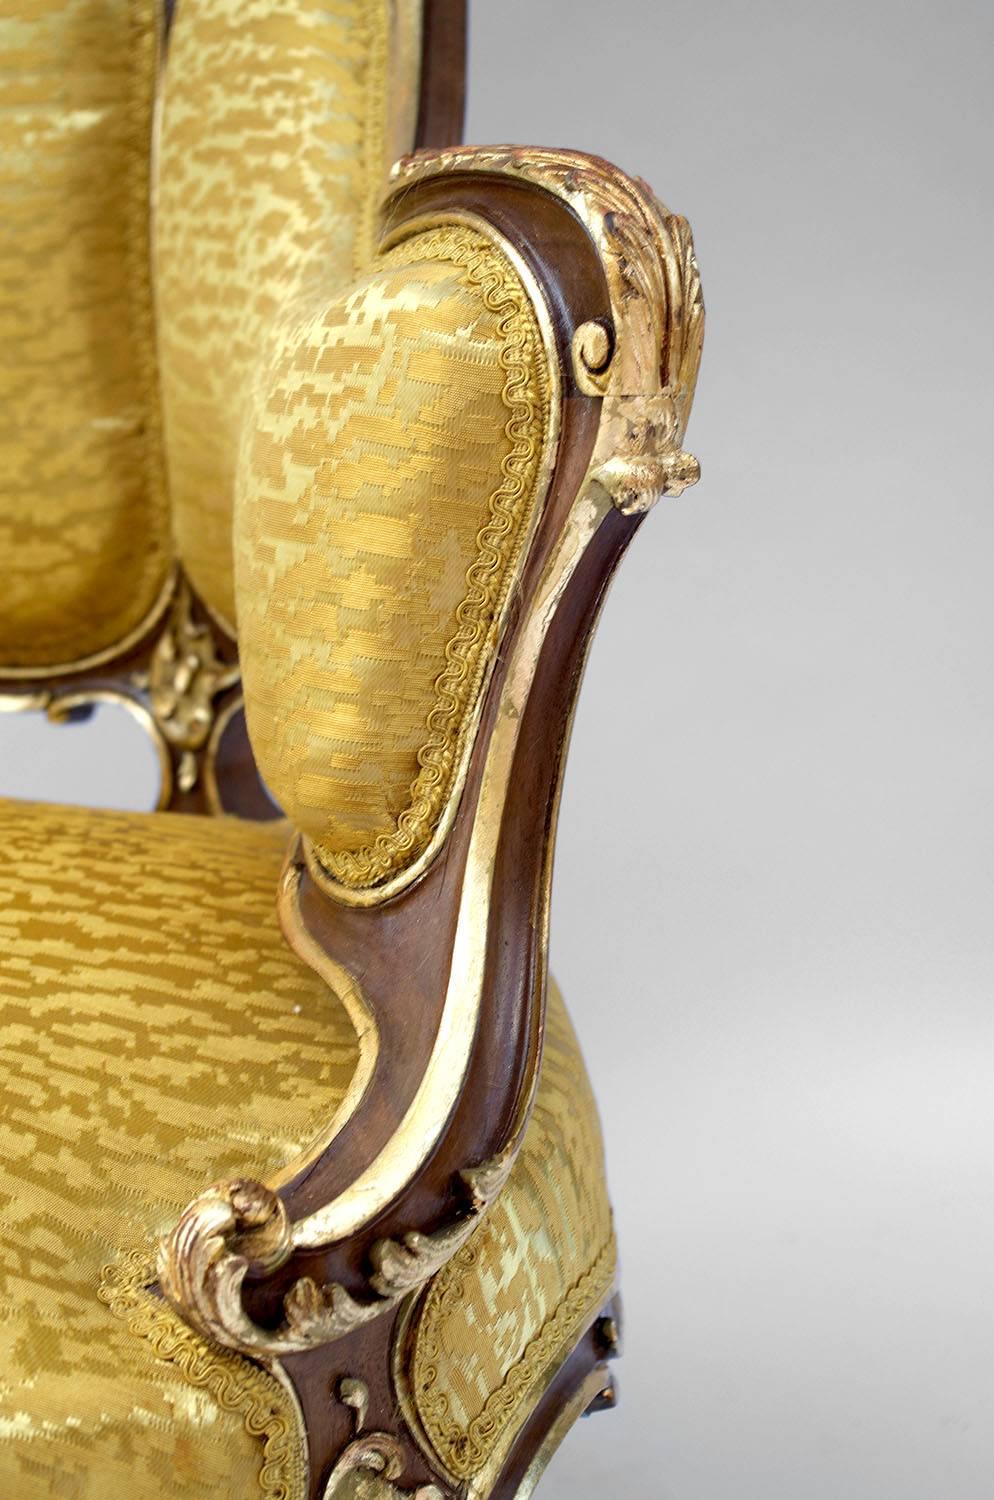 Pair of Rocaille style natural carved walnut with gilt highlights bergère.
Gondole backseat and small curved legs, uprights and armrests in chantourné shape.
Rocaille style carved decorations with gilt highlights as shells, interlaced plants,